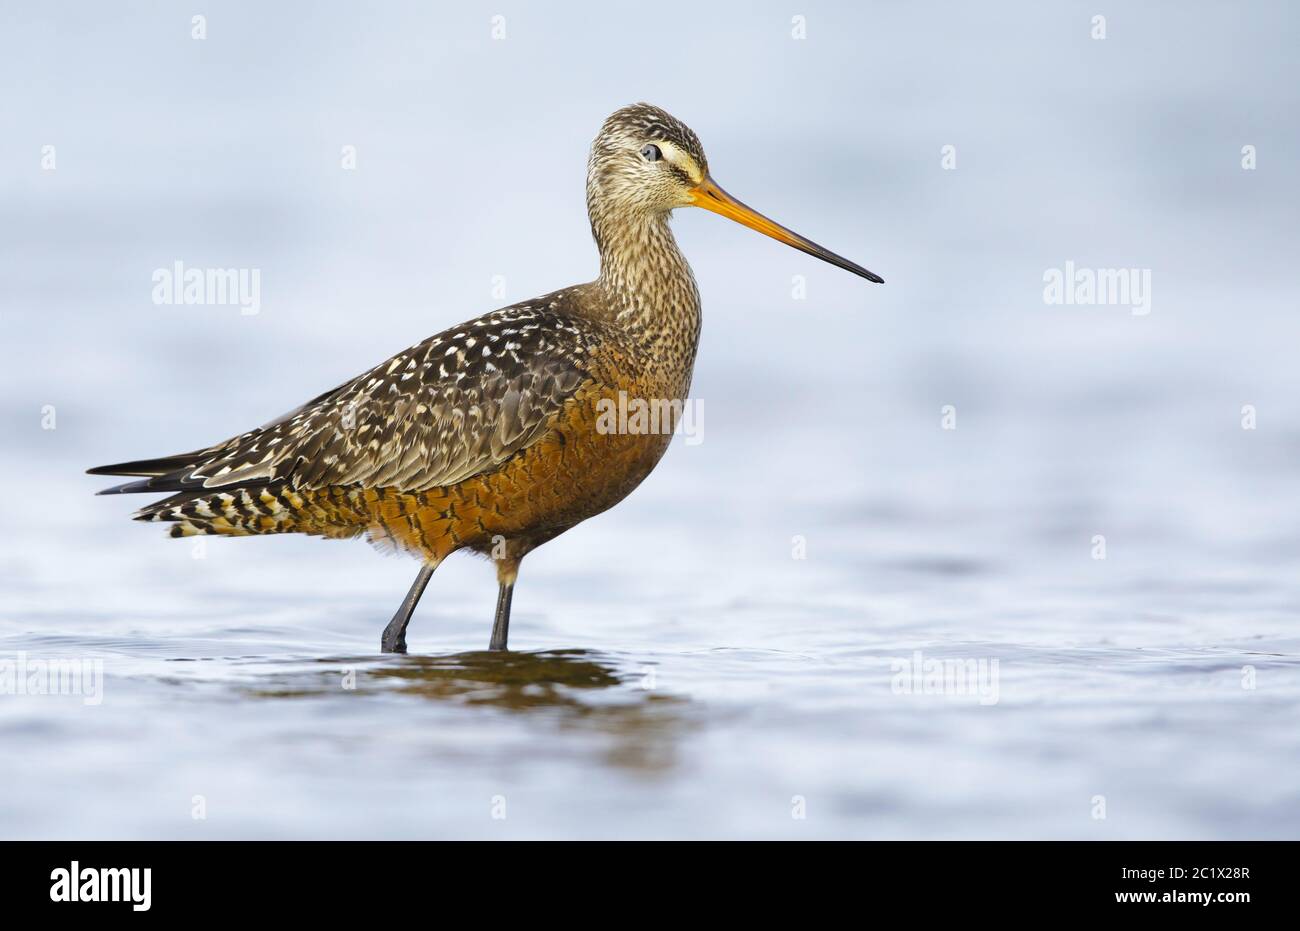 hudsonian godwit (Limosa haemastica), Adult male in summer plumage standing in arctic tundra lake, Canada, Manitoba Stock Photo